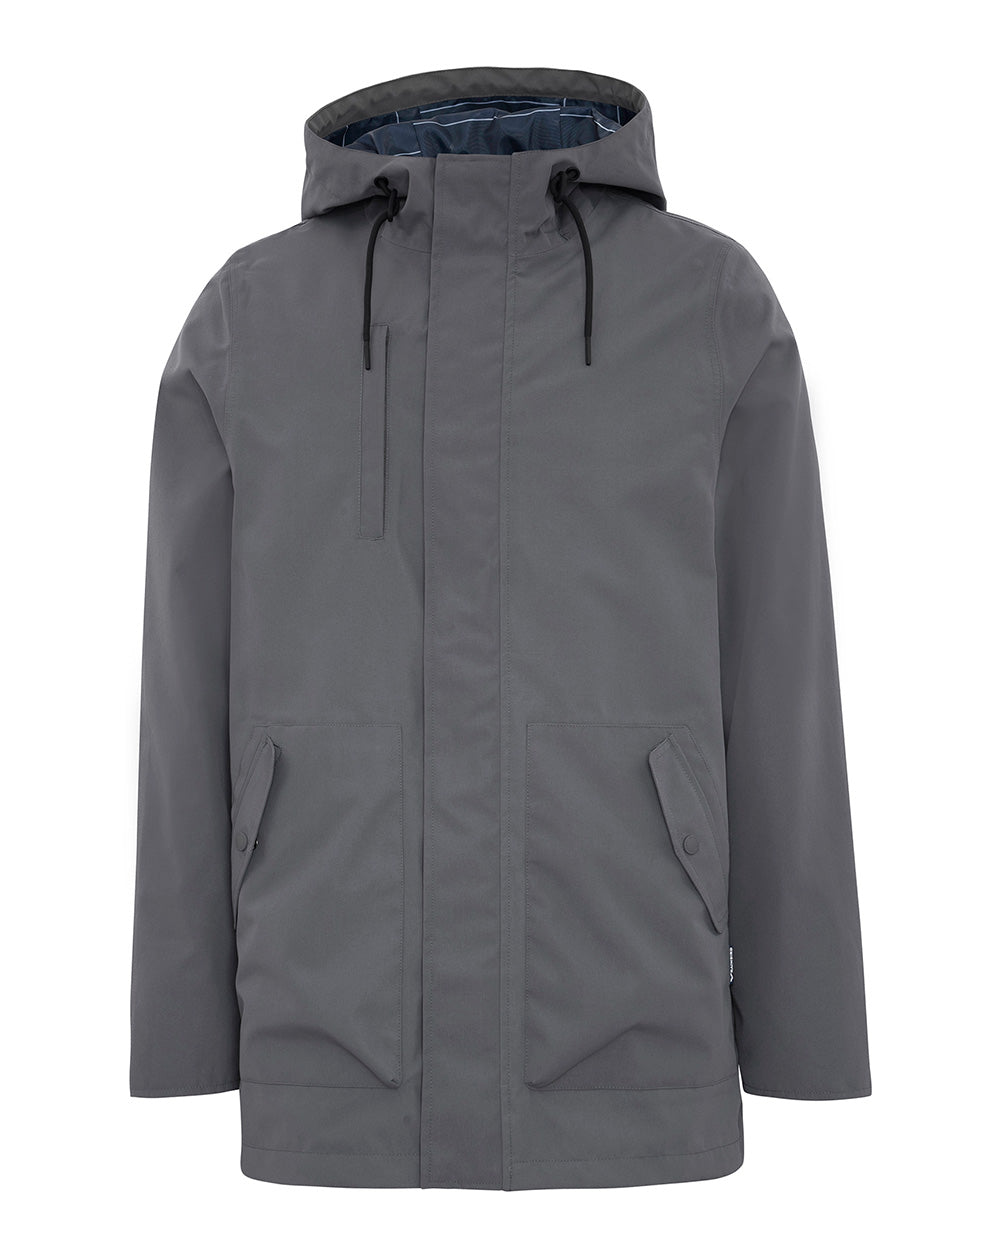 Ares Anorak in Charcoal